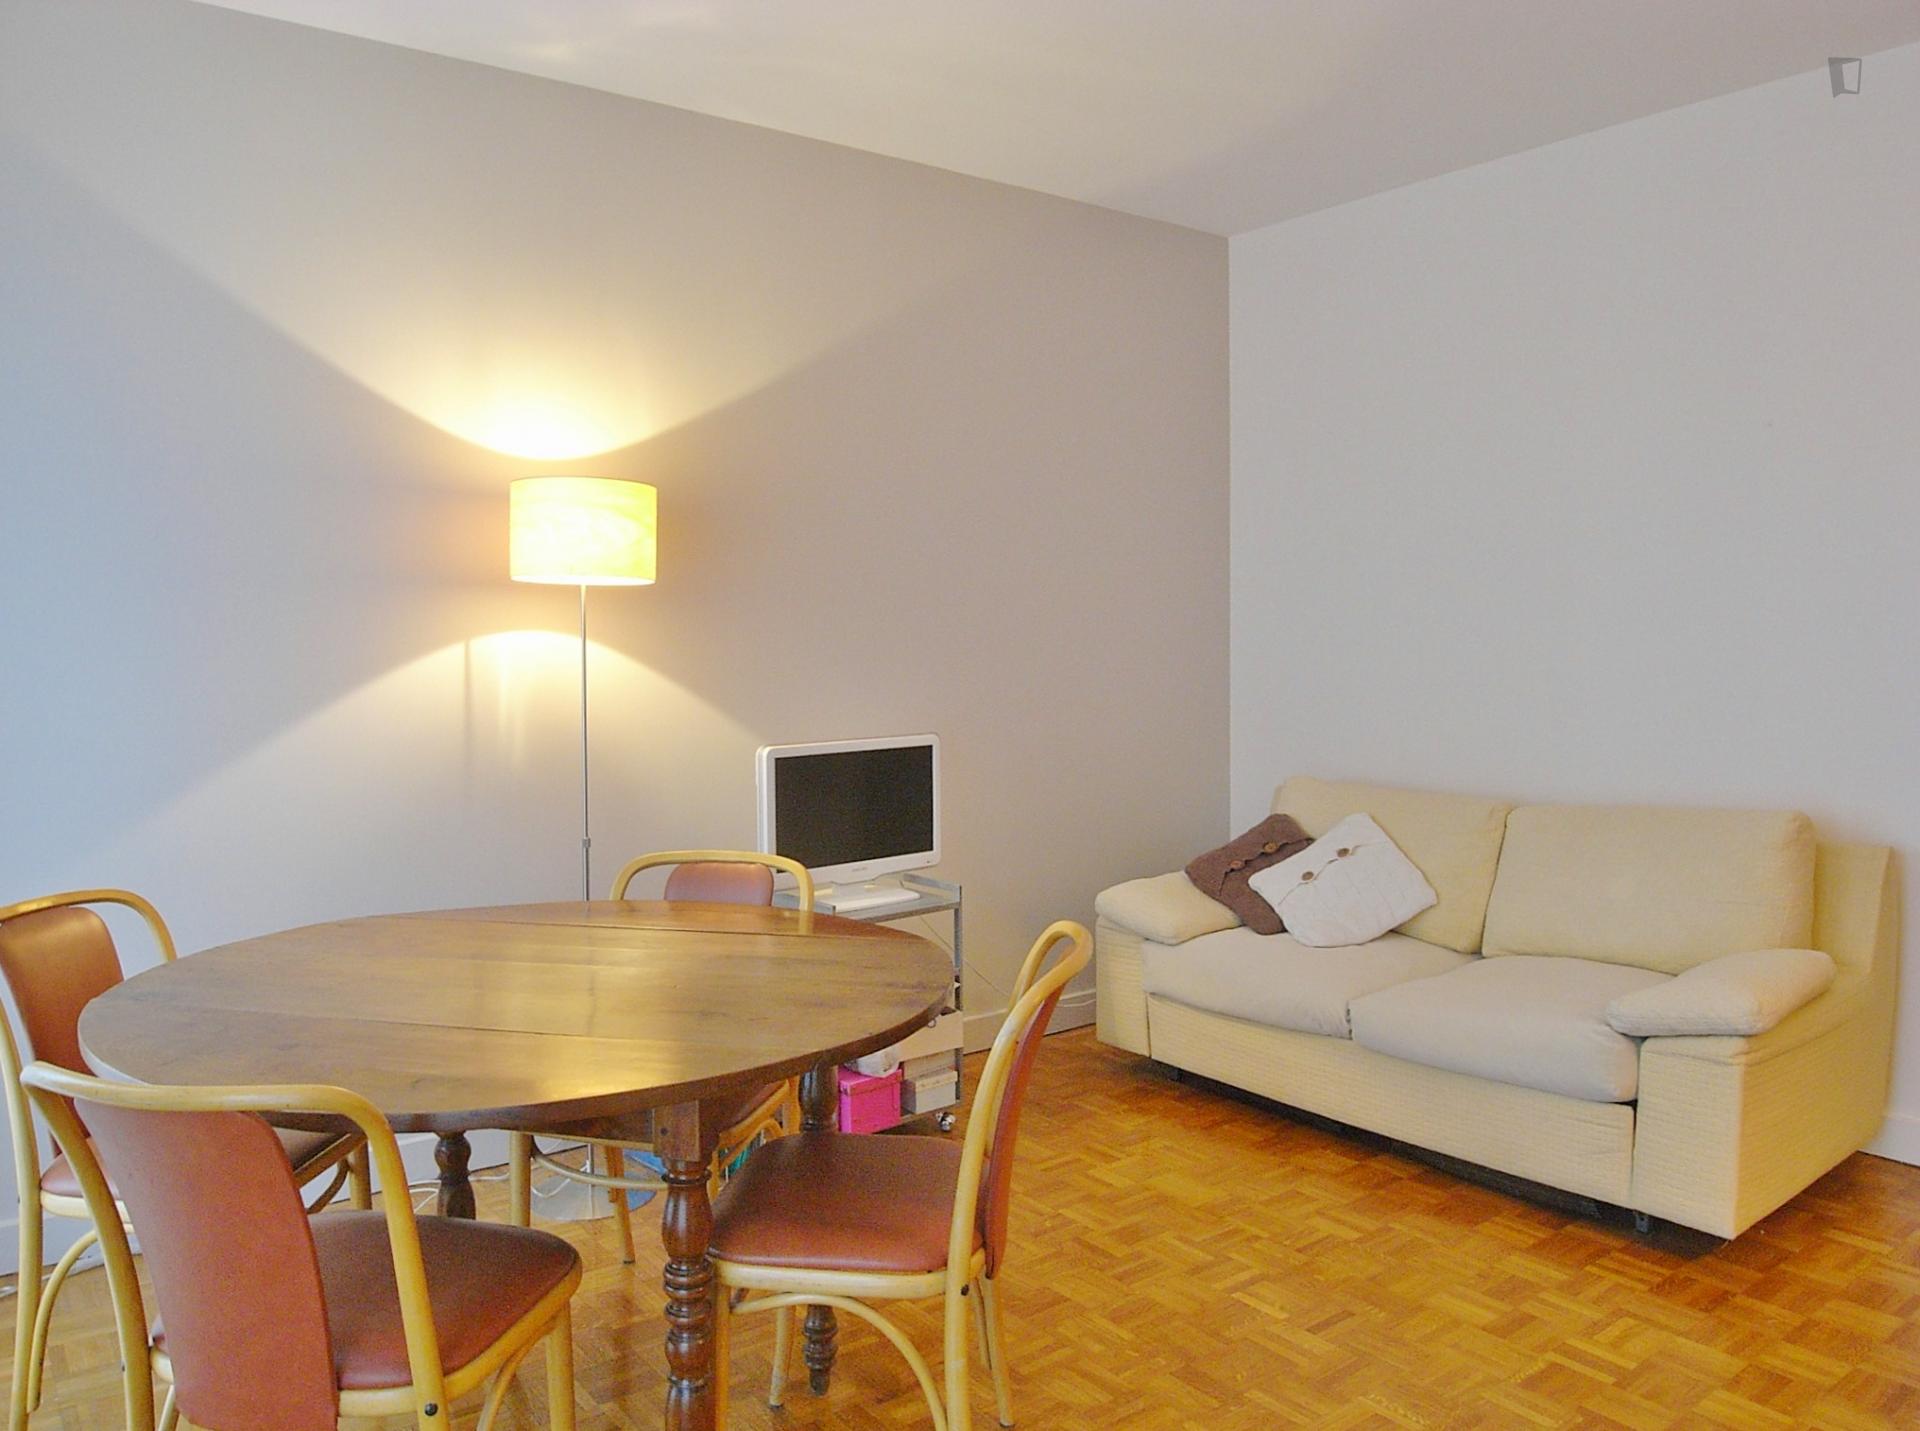 D'Alesia - Nice flat for expats in Paris